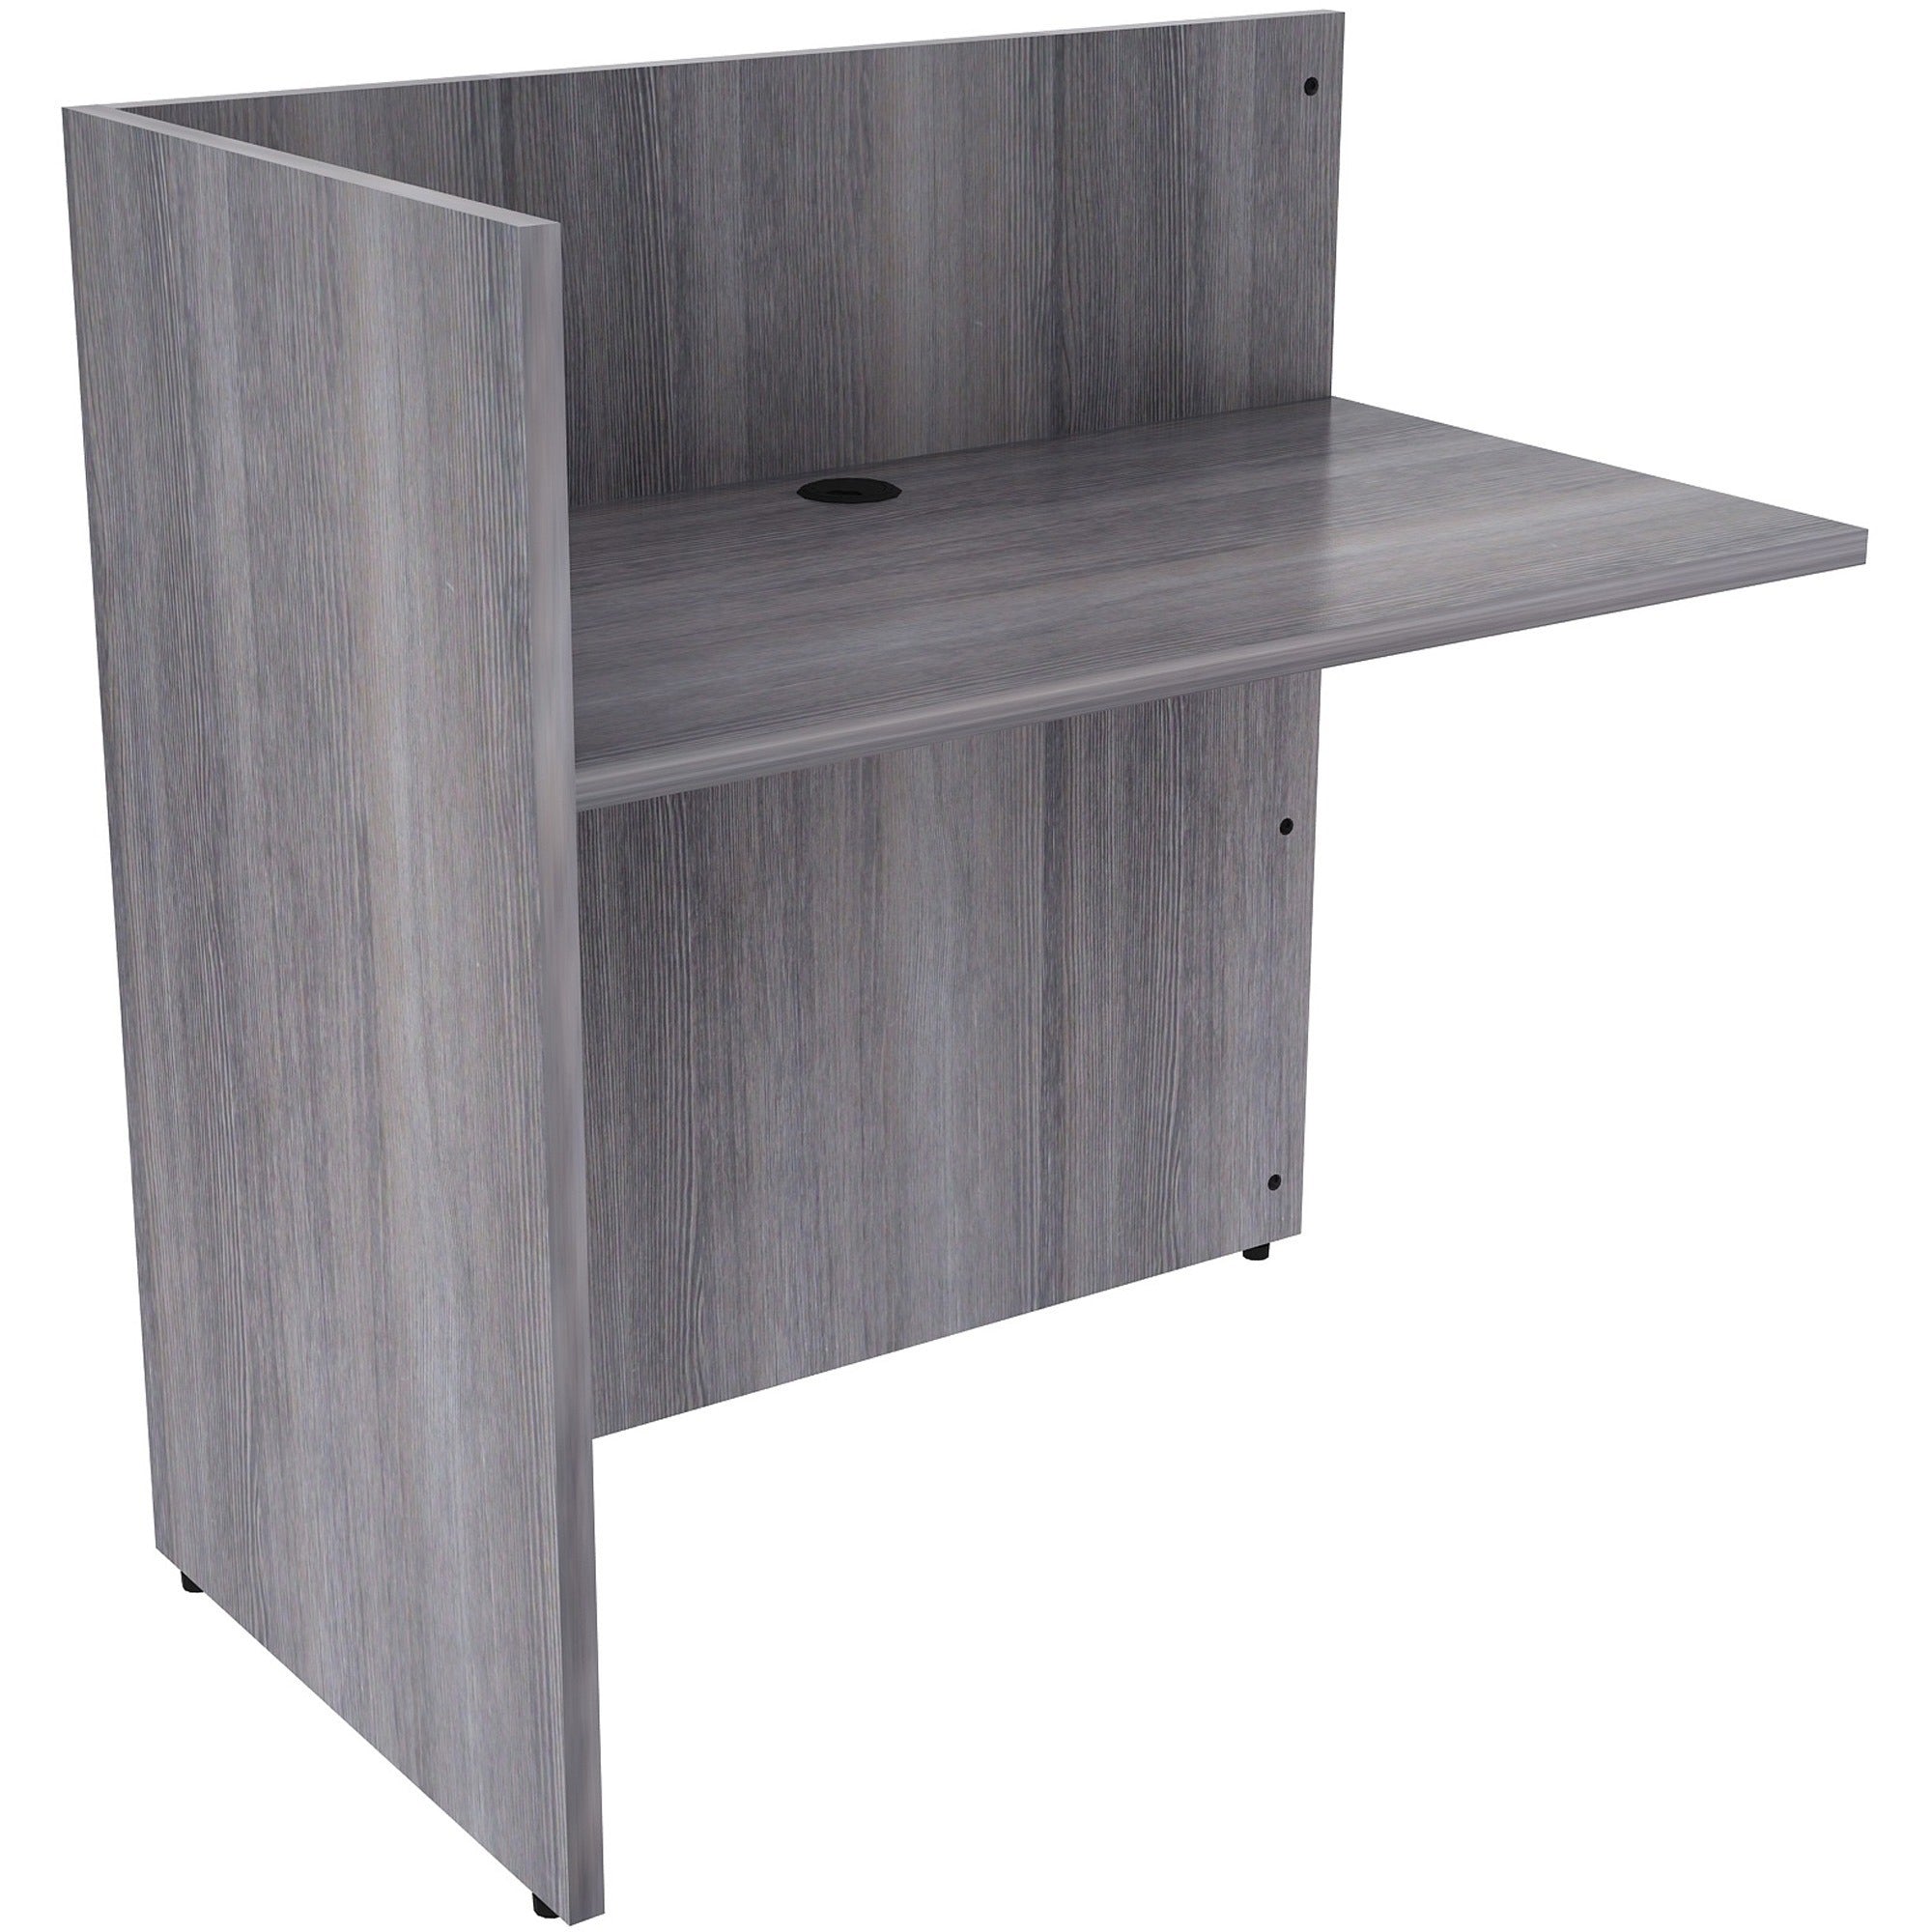 lorell-essentials-series-reception-return-1-top-42-x-24415-material-laminate-finish-weathered-charcoal_llr18308 - 1